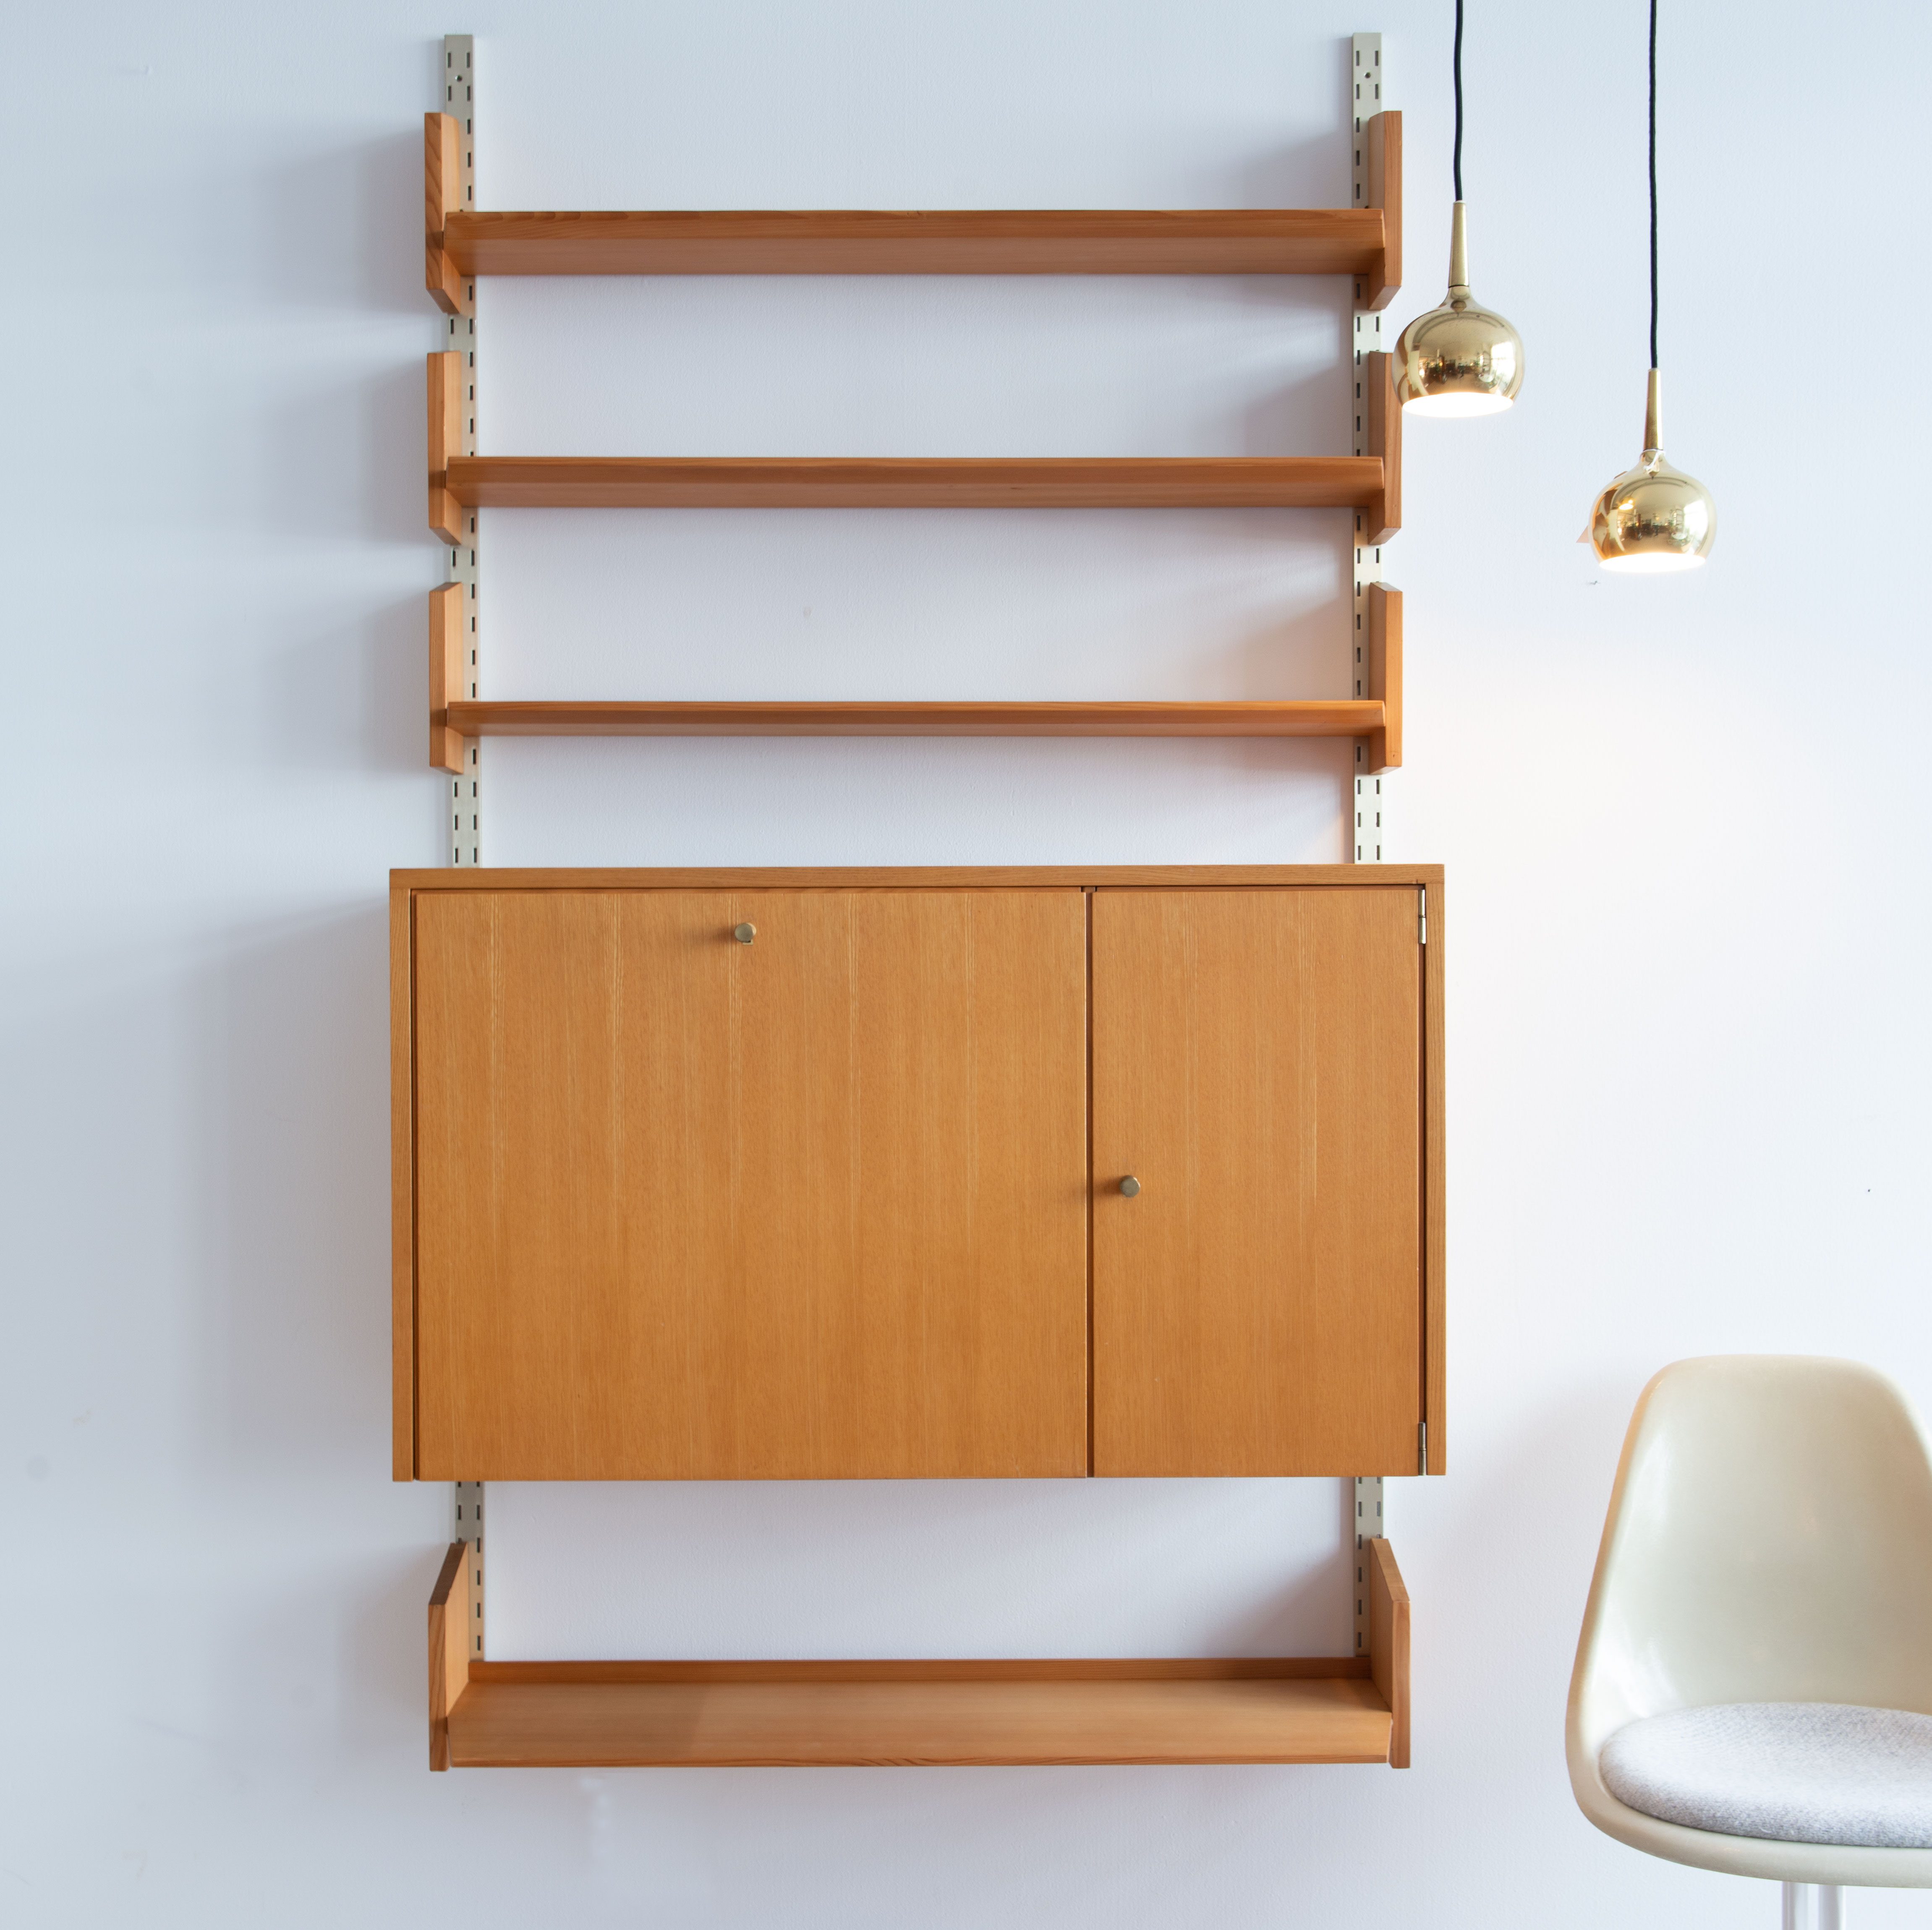 Dieter Reinhold Shelving Unit with Secretary. Produced by WK Möbel in
Germany, 1960s. Available at heyday möbel. Retro Furniture and Other Stuff.